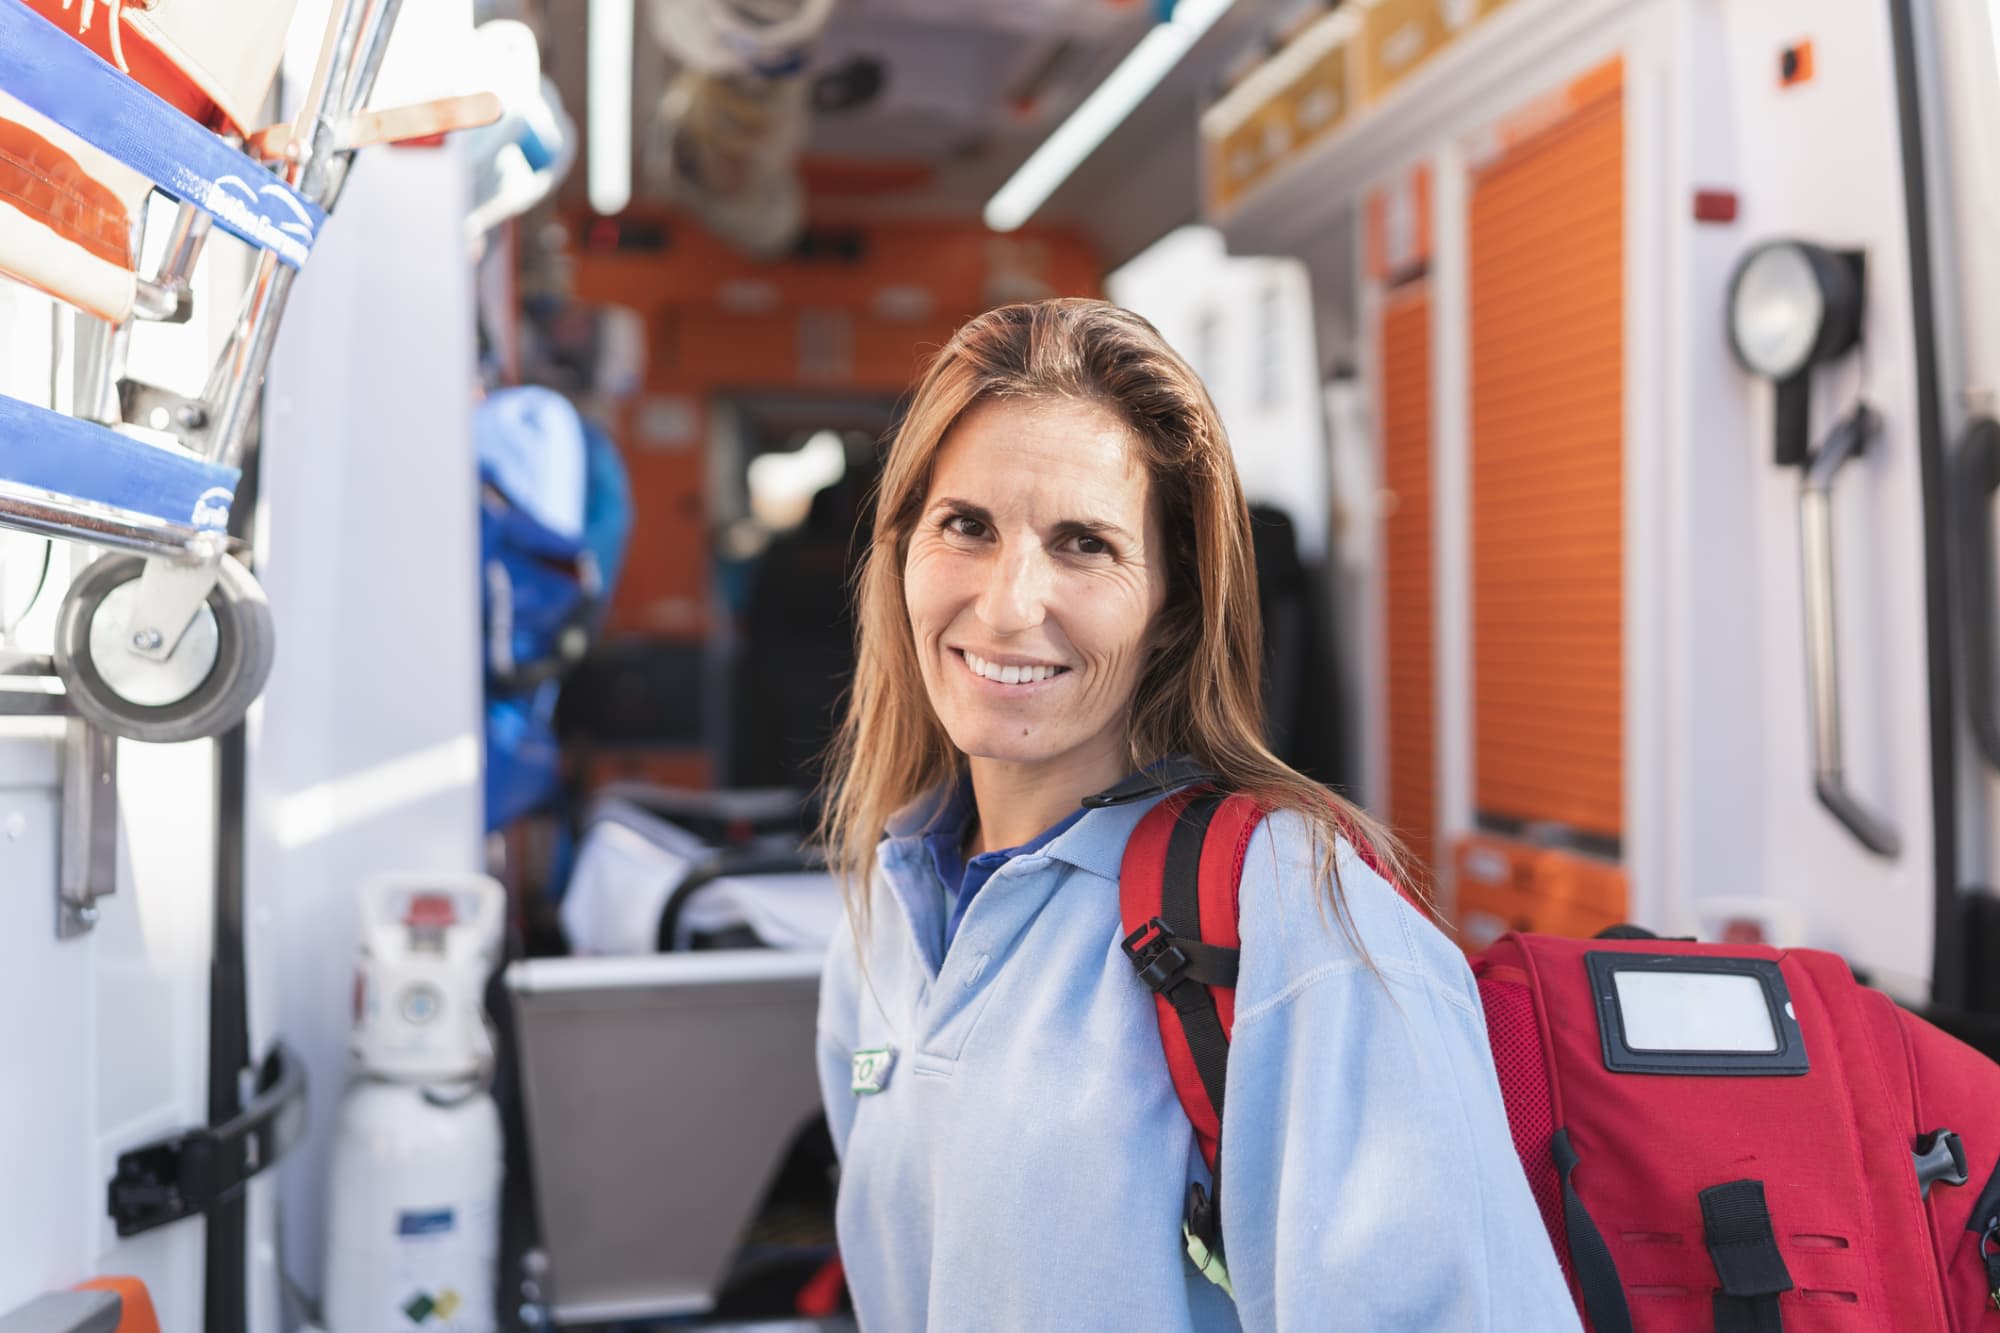 Registered Nurse vs. Paramedic: What’s the Difference?